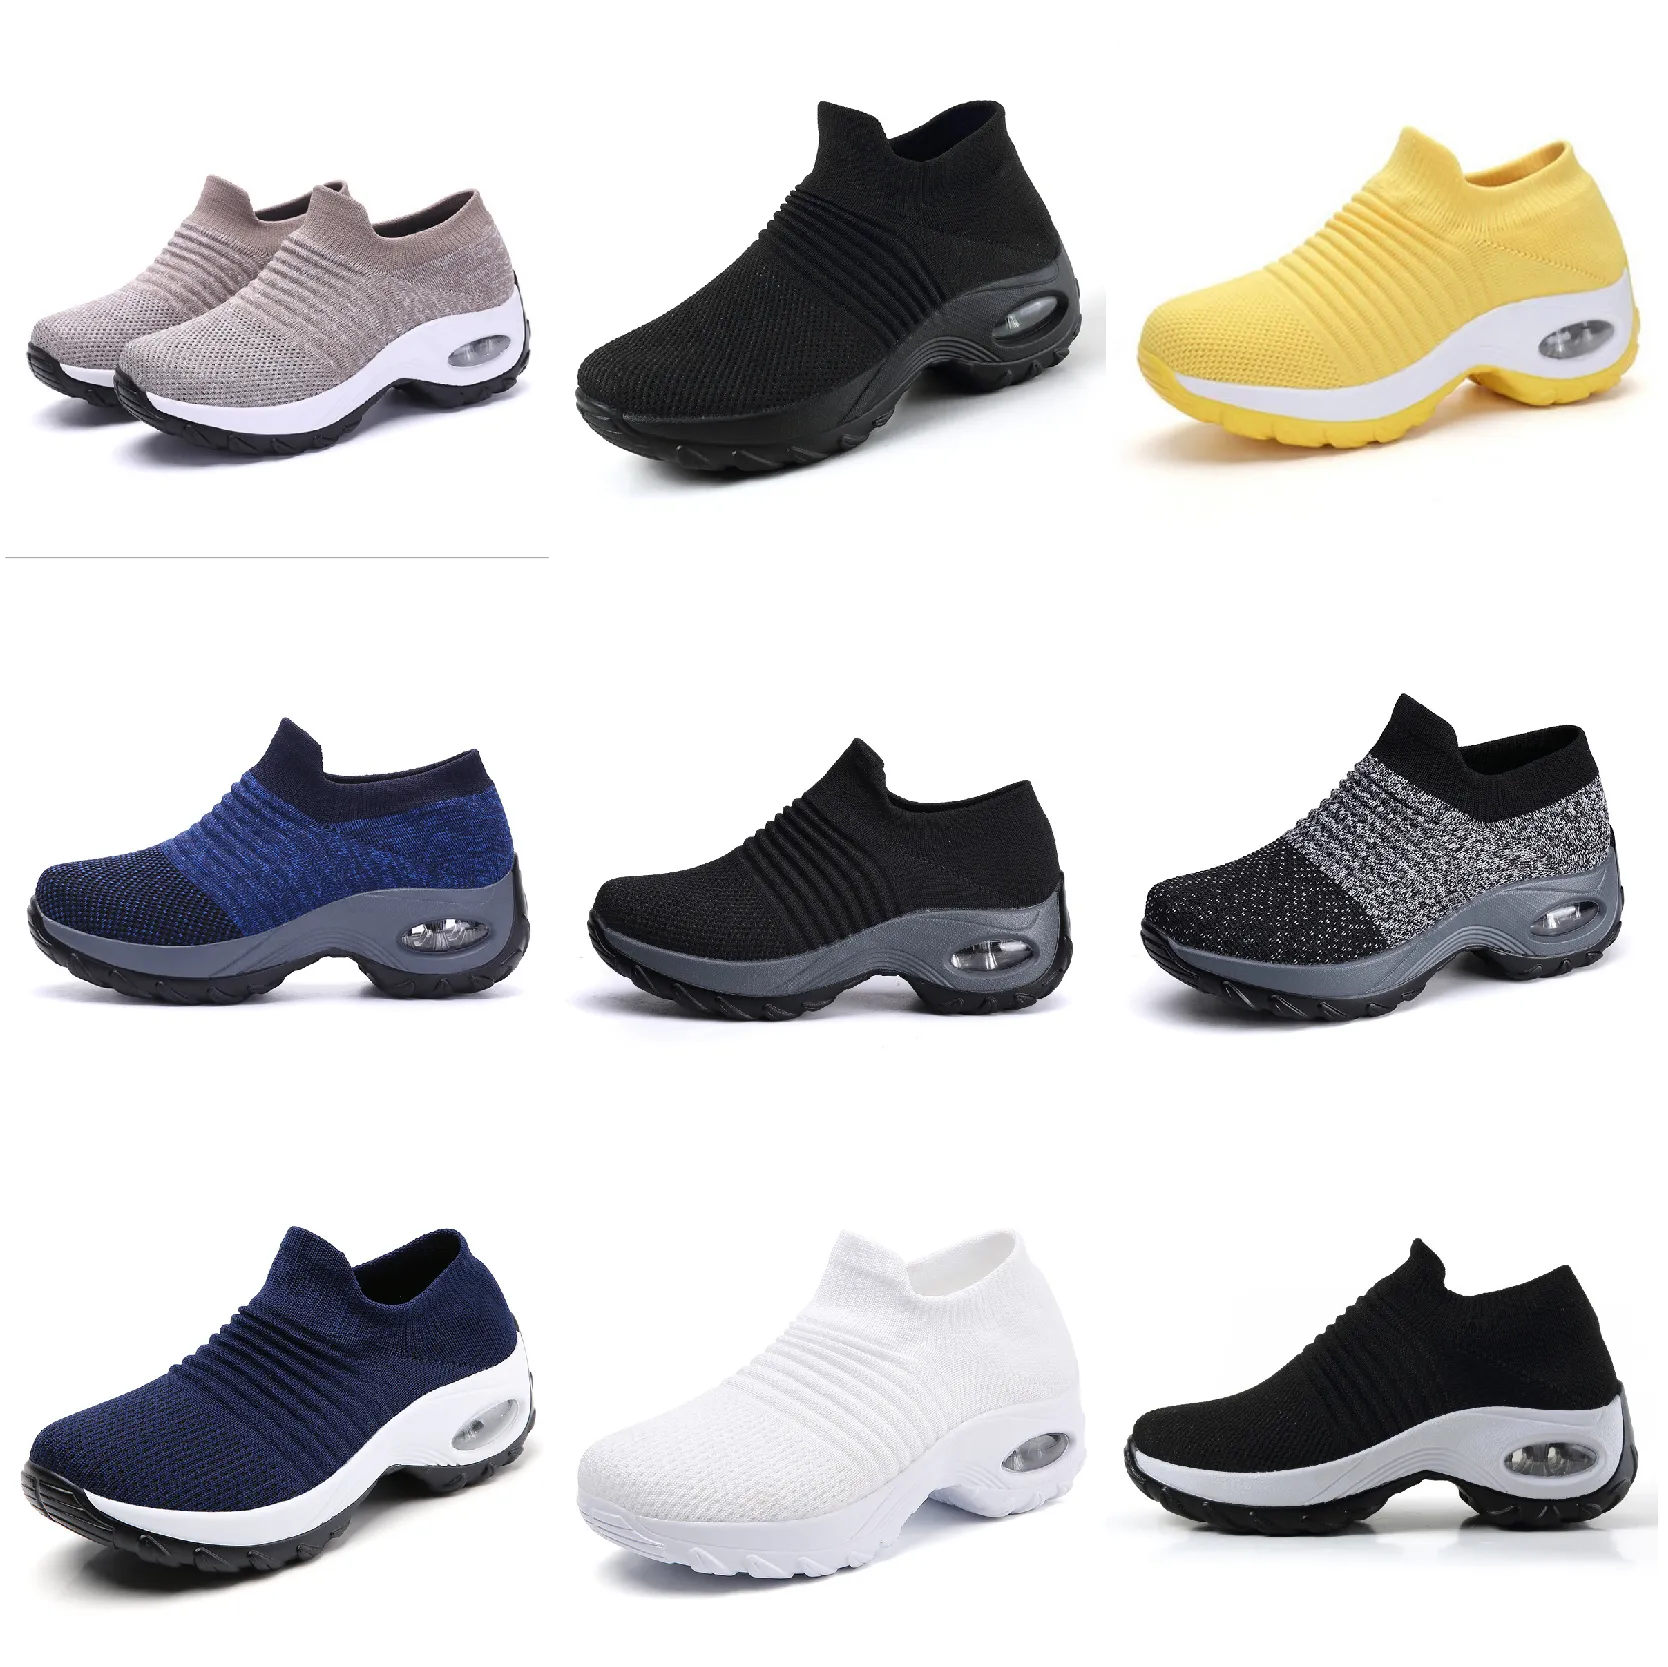 Sports and leisure high elasticity breathable shoes, trendy and fashionable lightweight socks and shoes 10 trendings